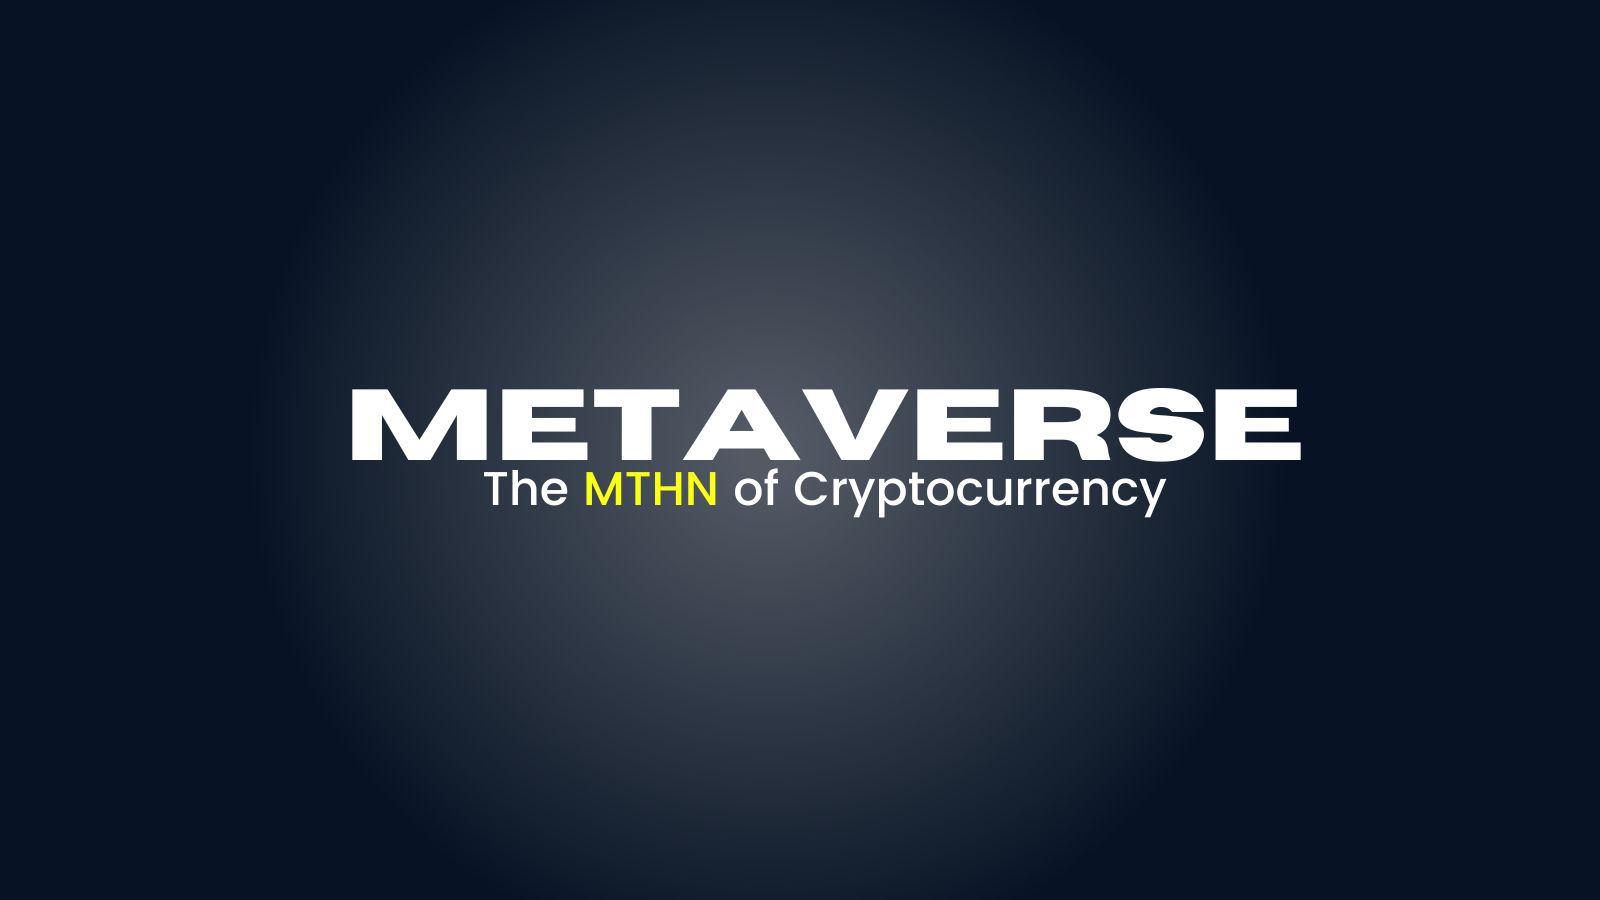 What is Metaverse in The MTHN of Cryptocurrency